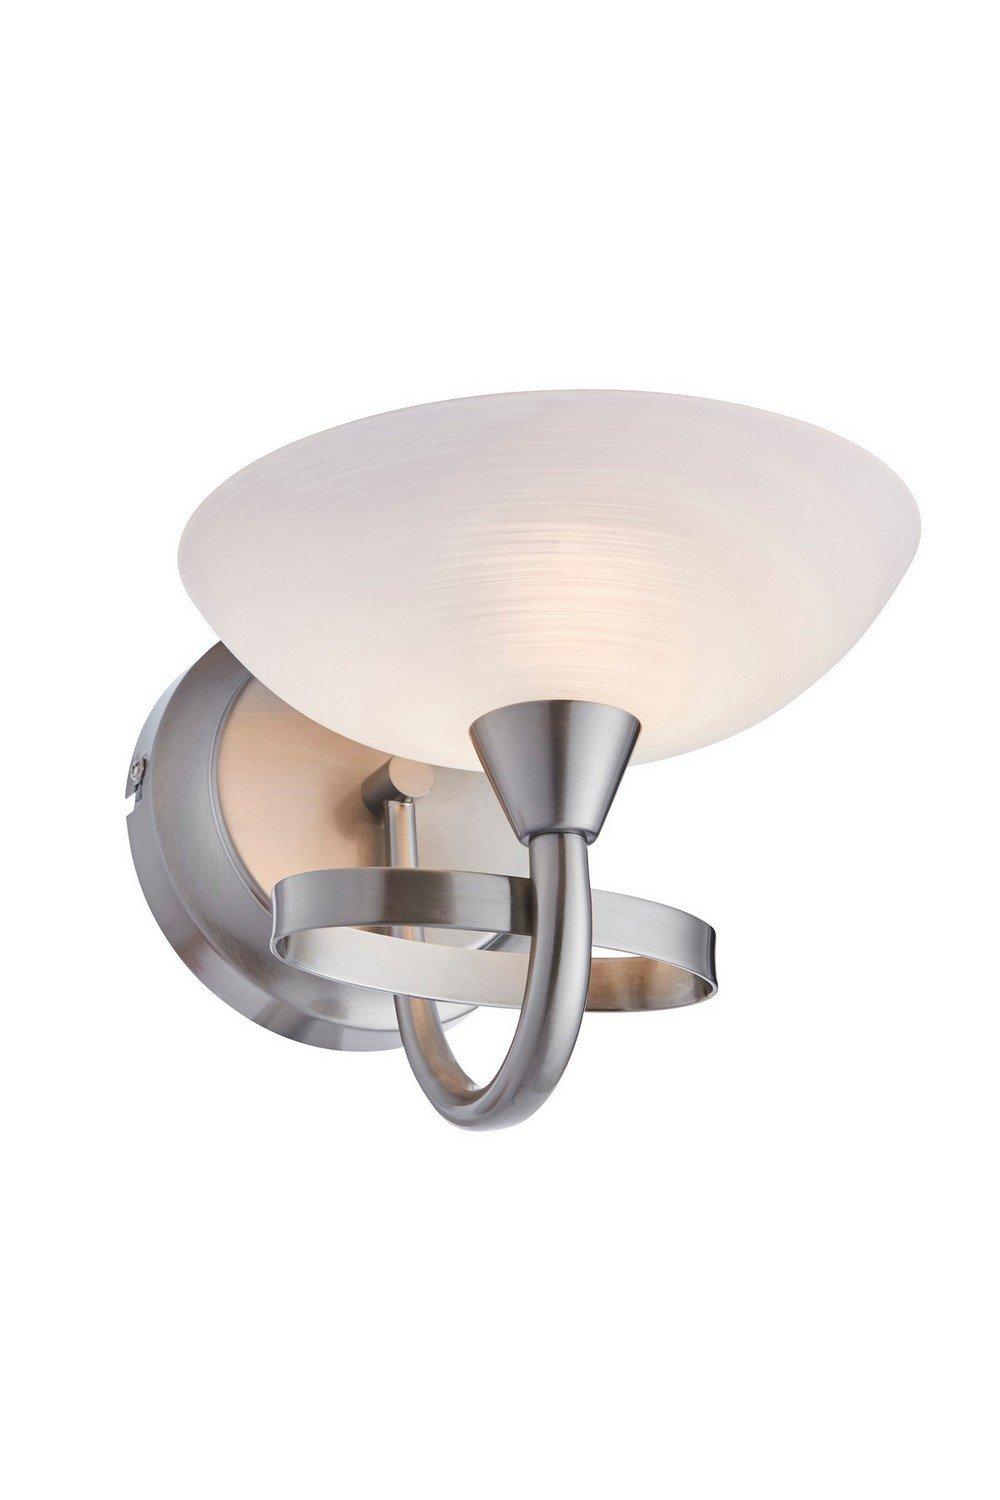 Cagney 1 Light Wall Light Satin Chrome with White Painted Glass Shade G9